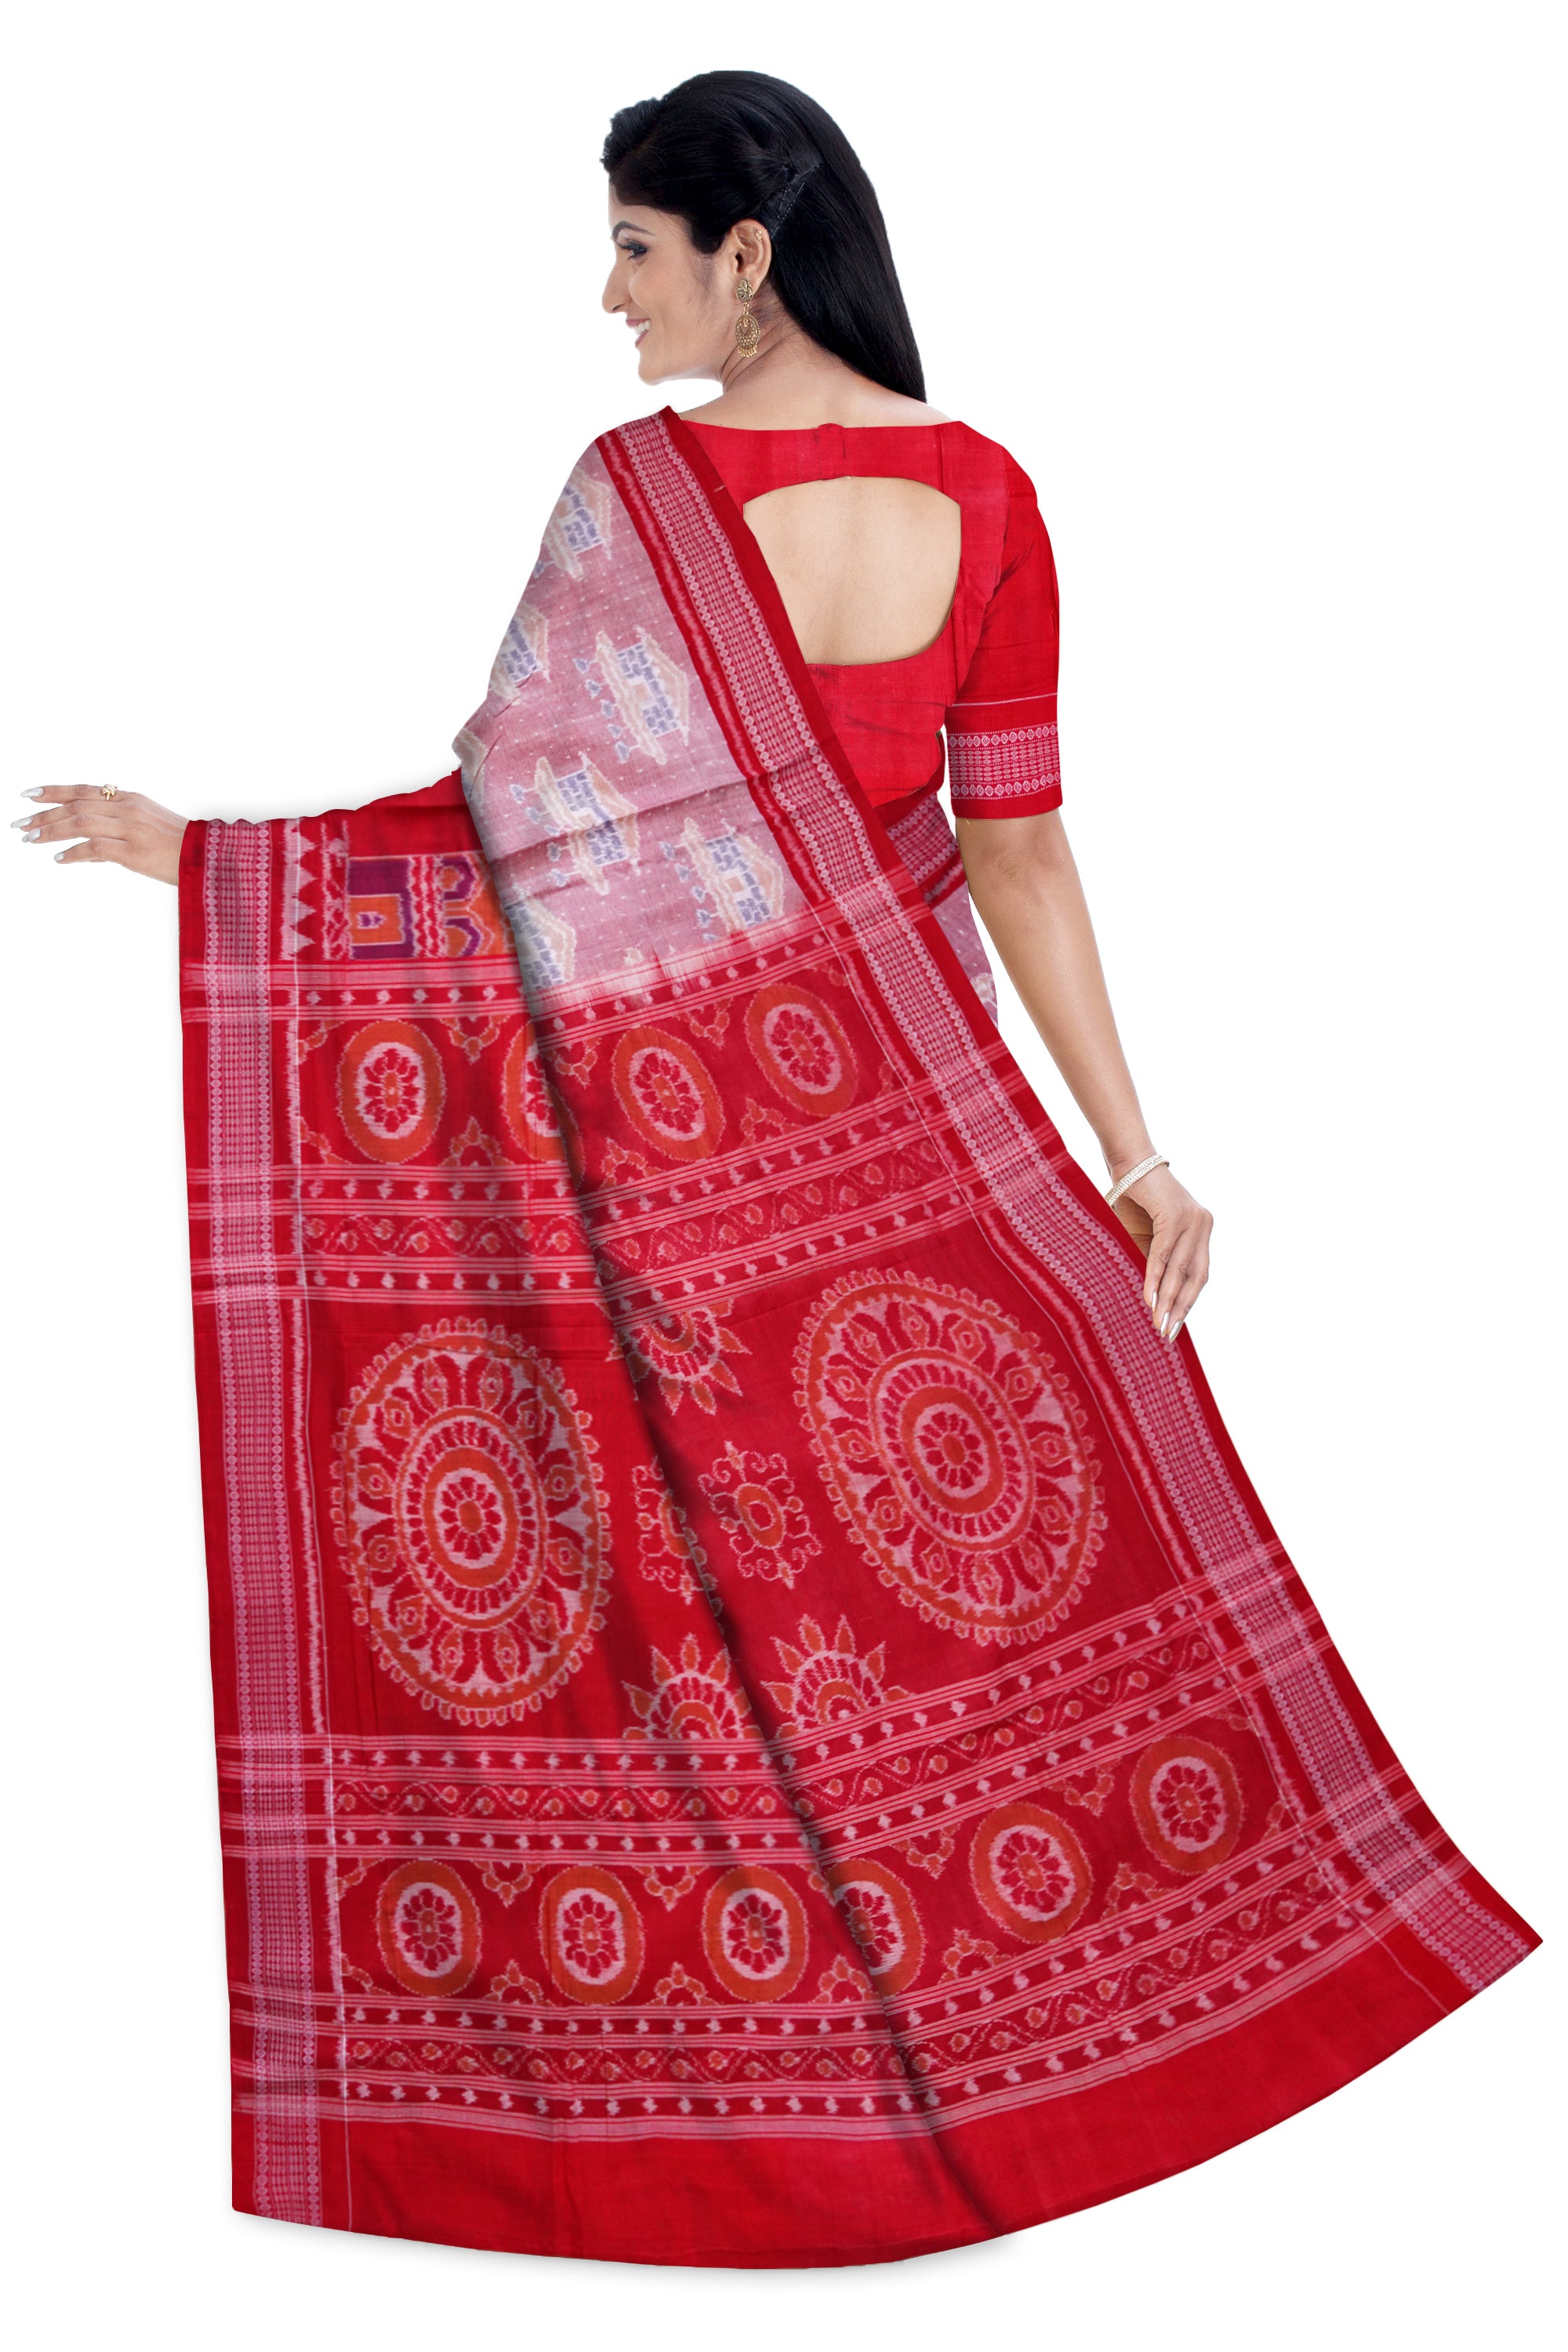 Konark desiged on whole body in Red and white colour, pallu design is based on traditional flower pattern cotton saree. - Koshali Arts & Crafts Enterprise